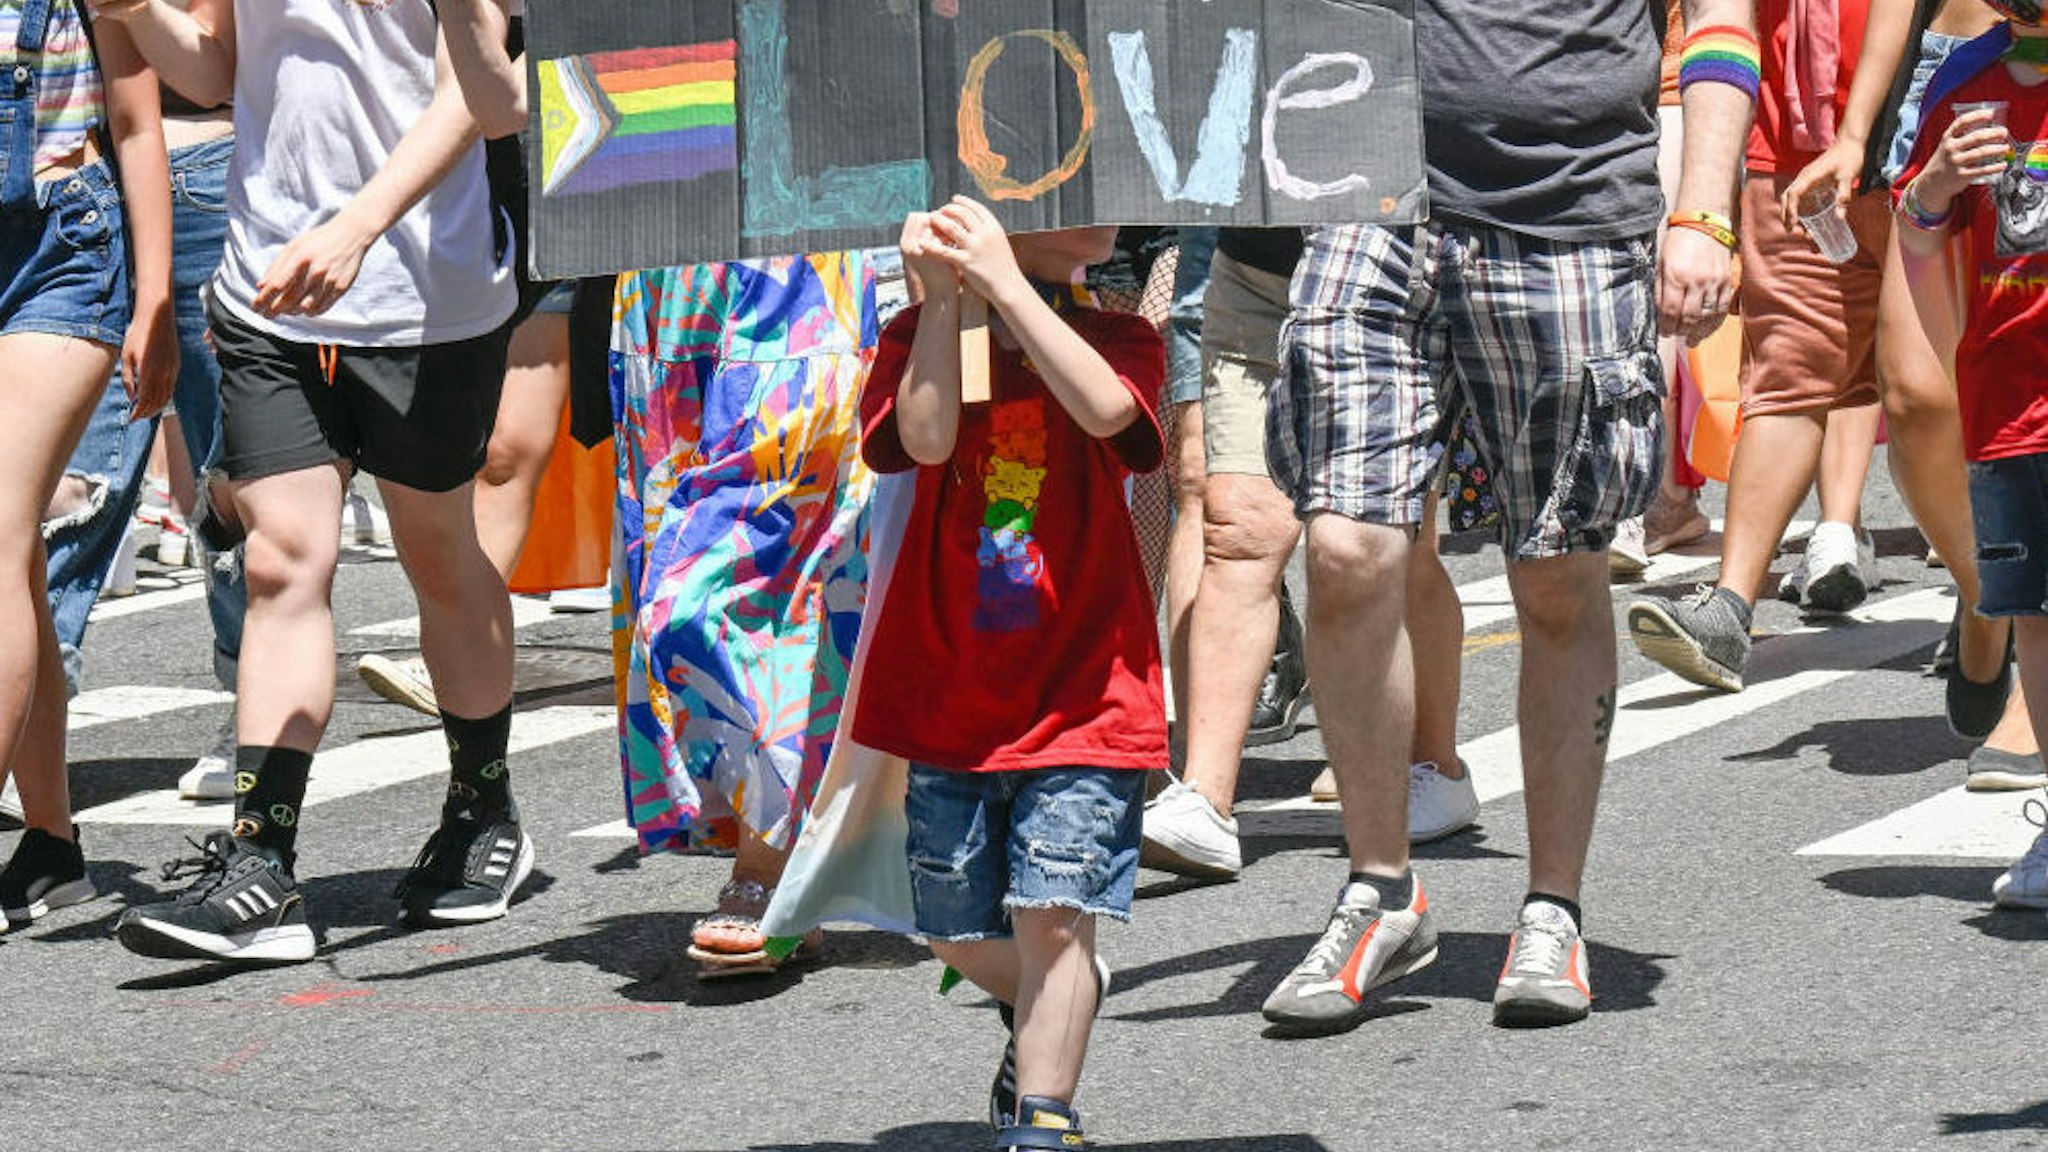 A child marches during the 2022 New York City Pride march on June 26, 2022 in New York City.